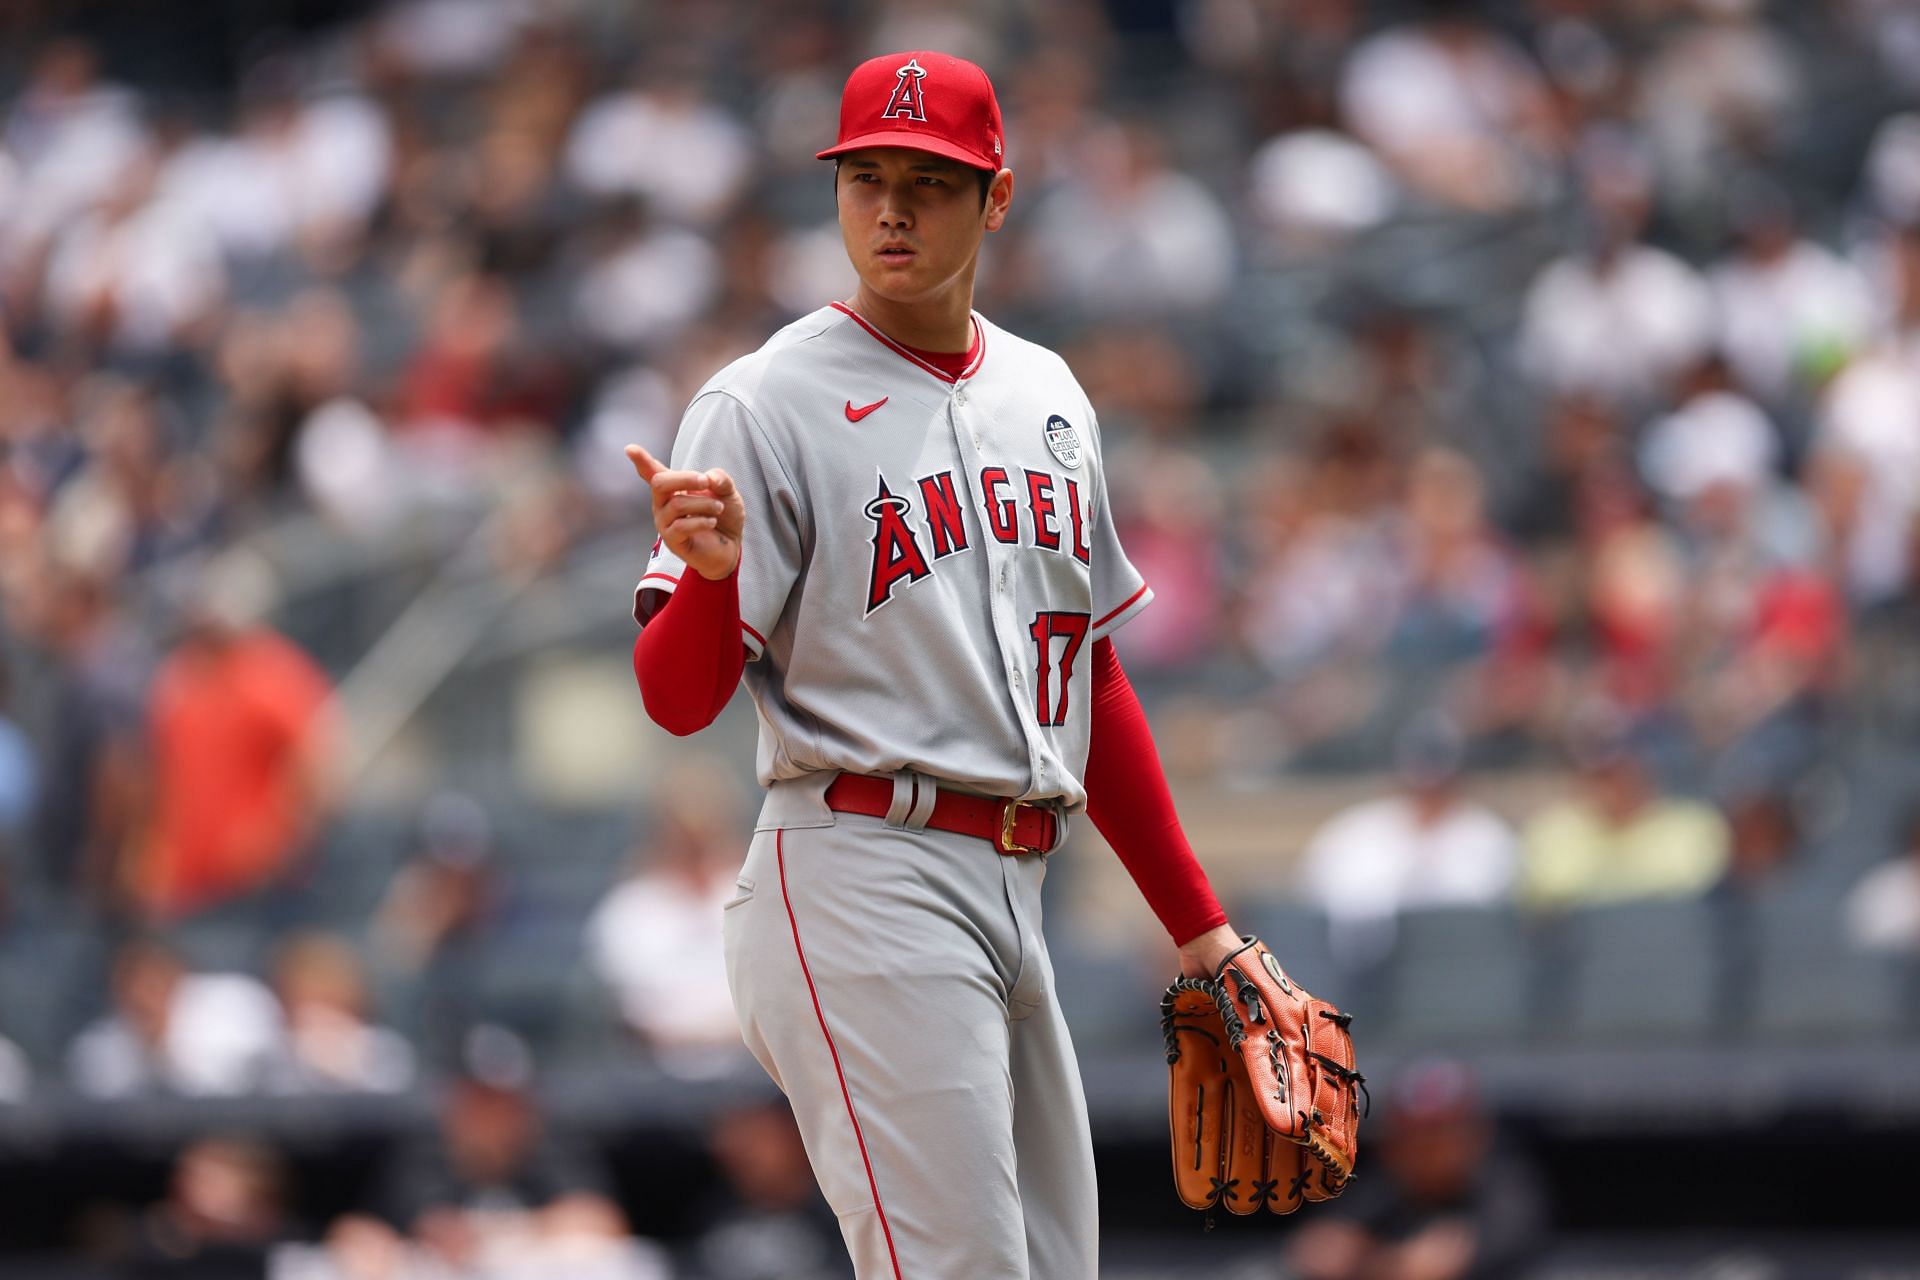 Los Angeles Angels two-way star Shohei Ohtani owns a 3.99 earned run average in 2022.